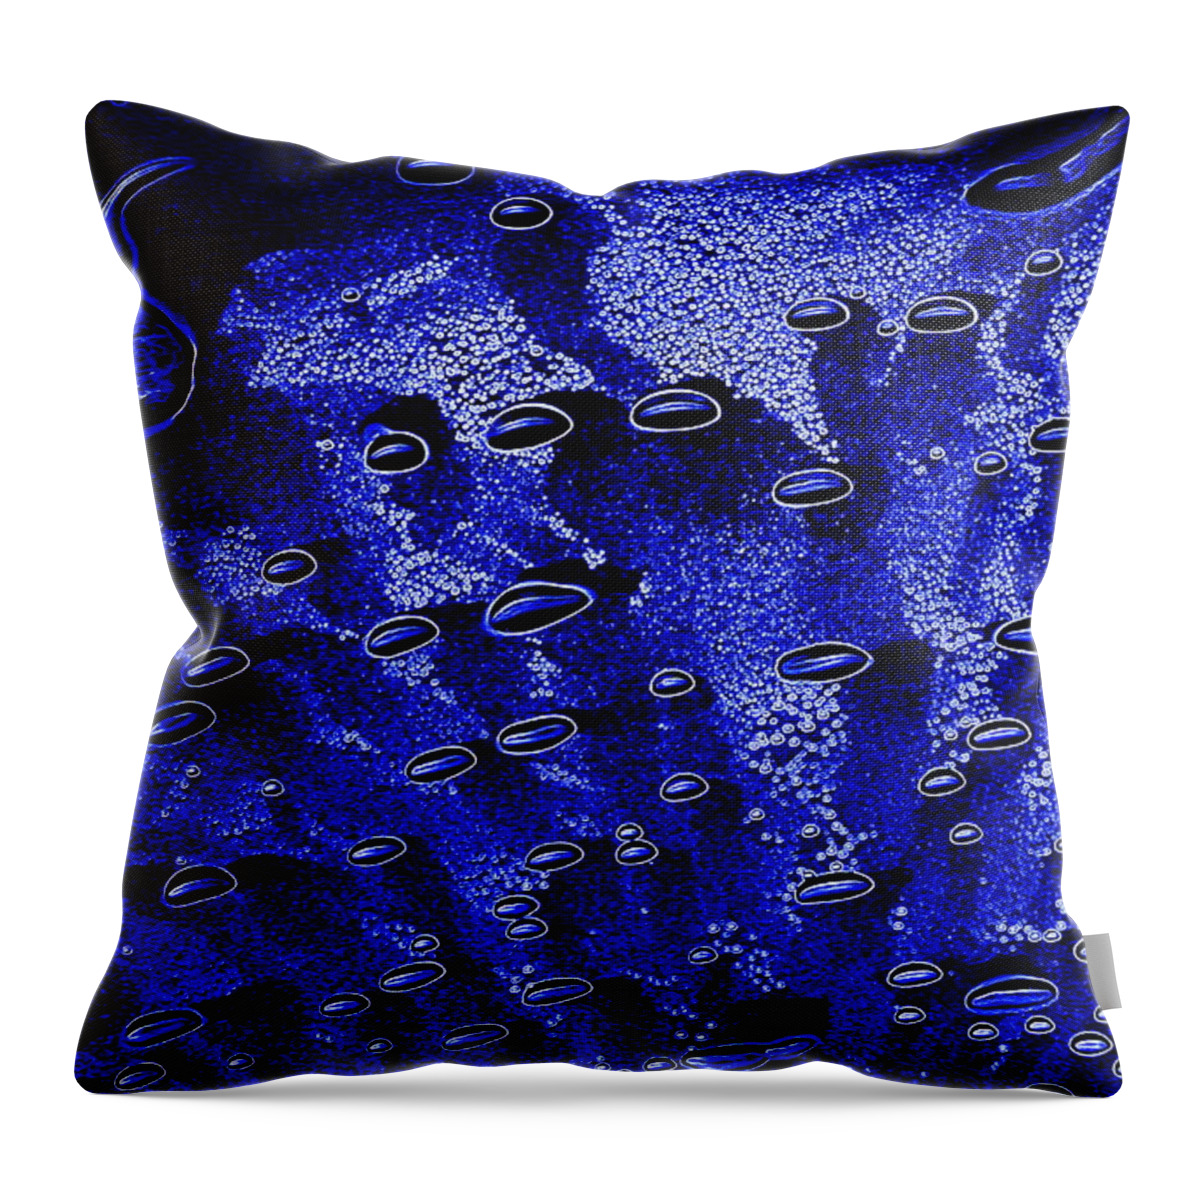 Cosmic Throw Pillow featuring the photograph Cosmic Series 002 - Tiny Bubbles by Larry Ward